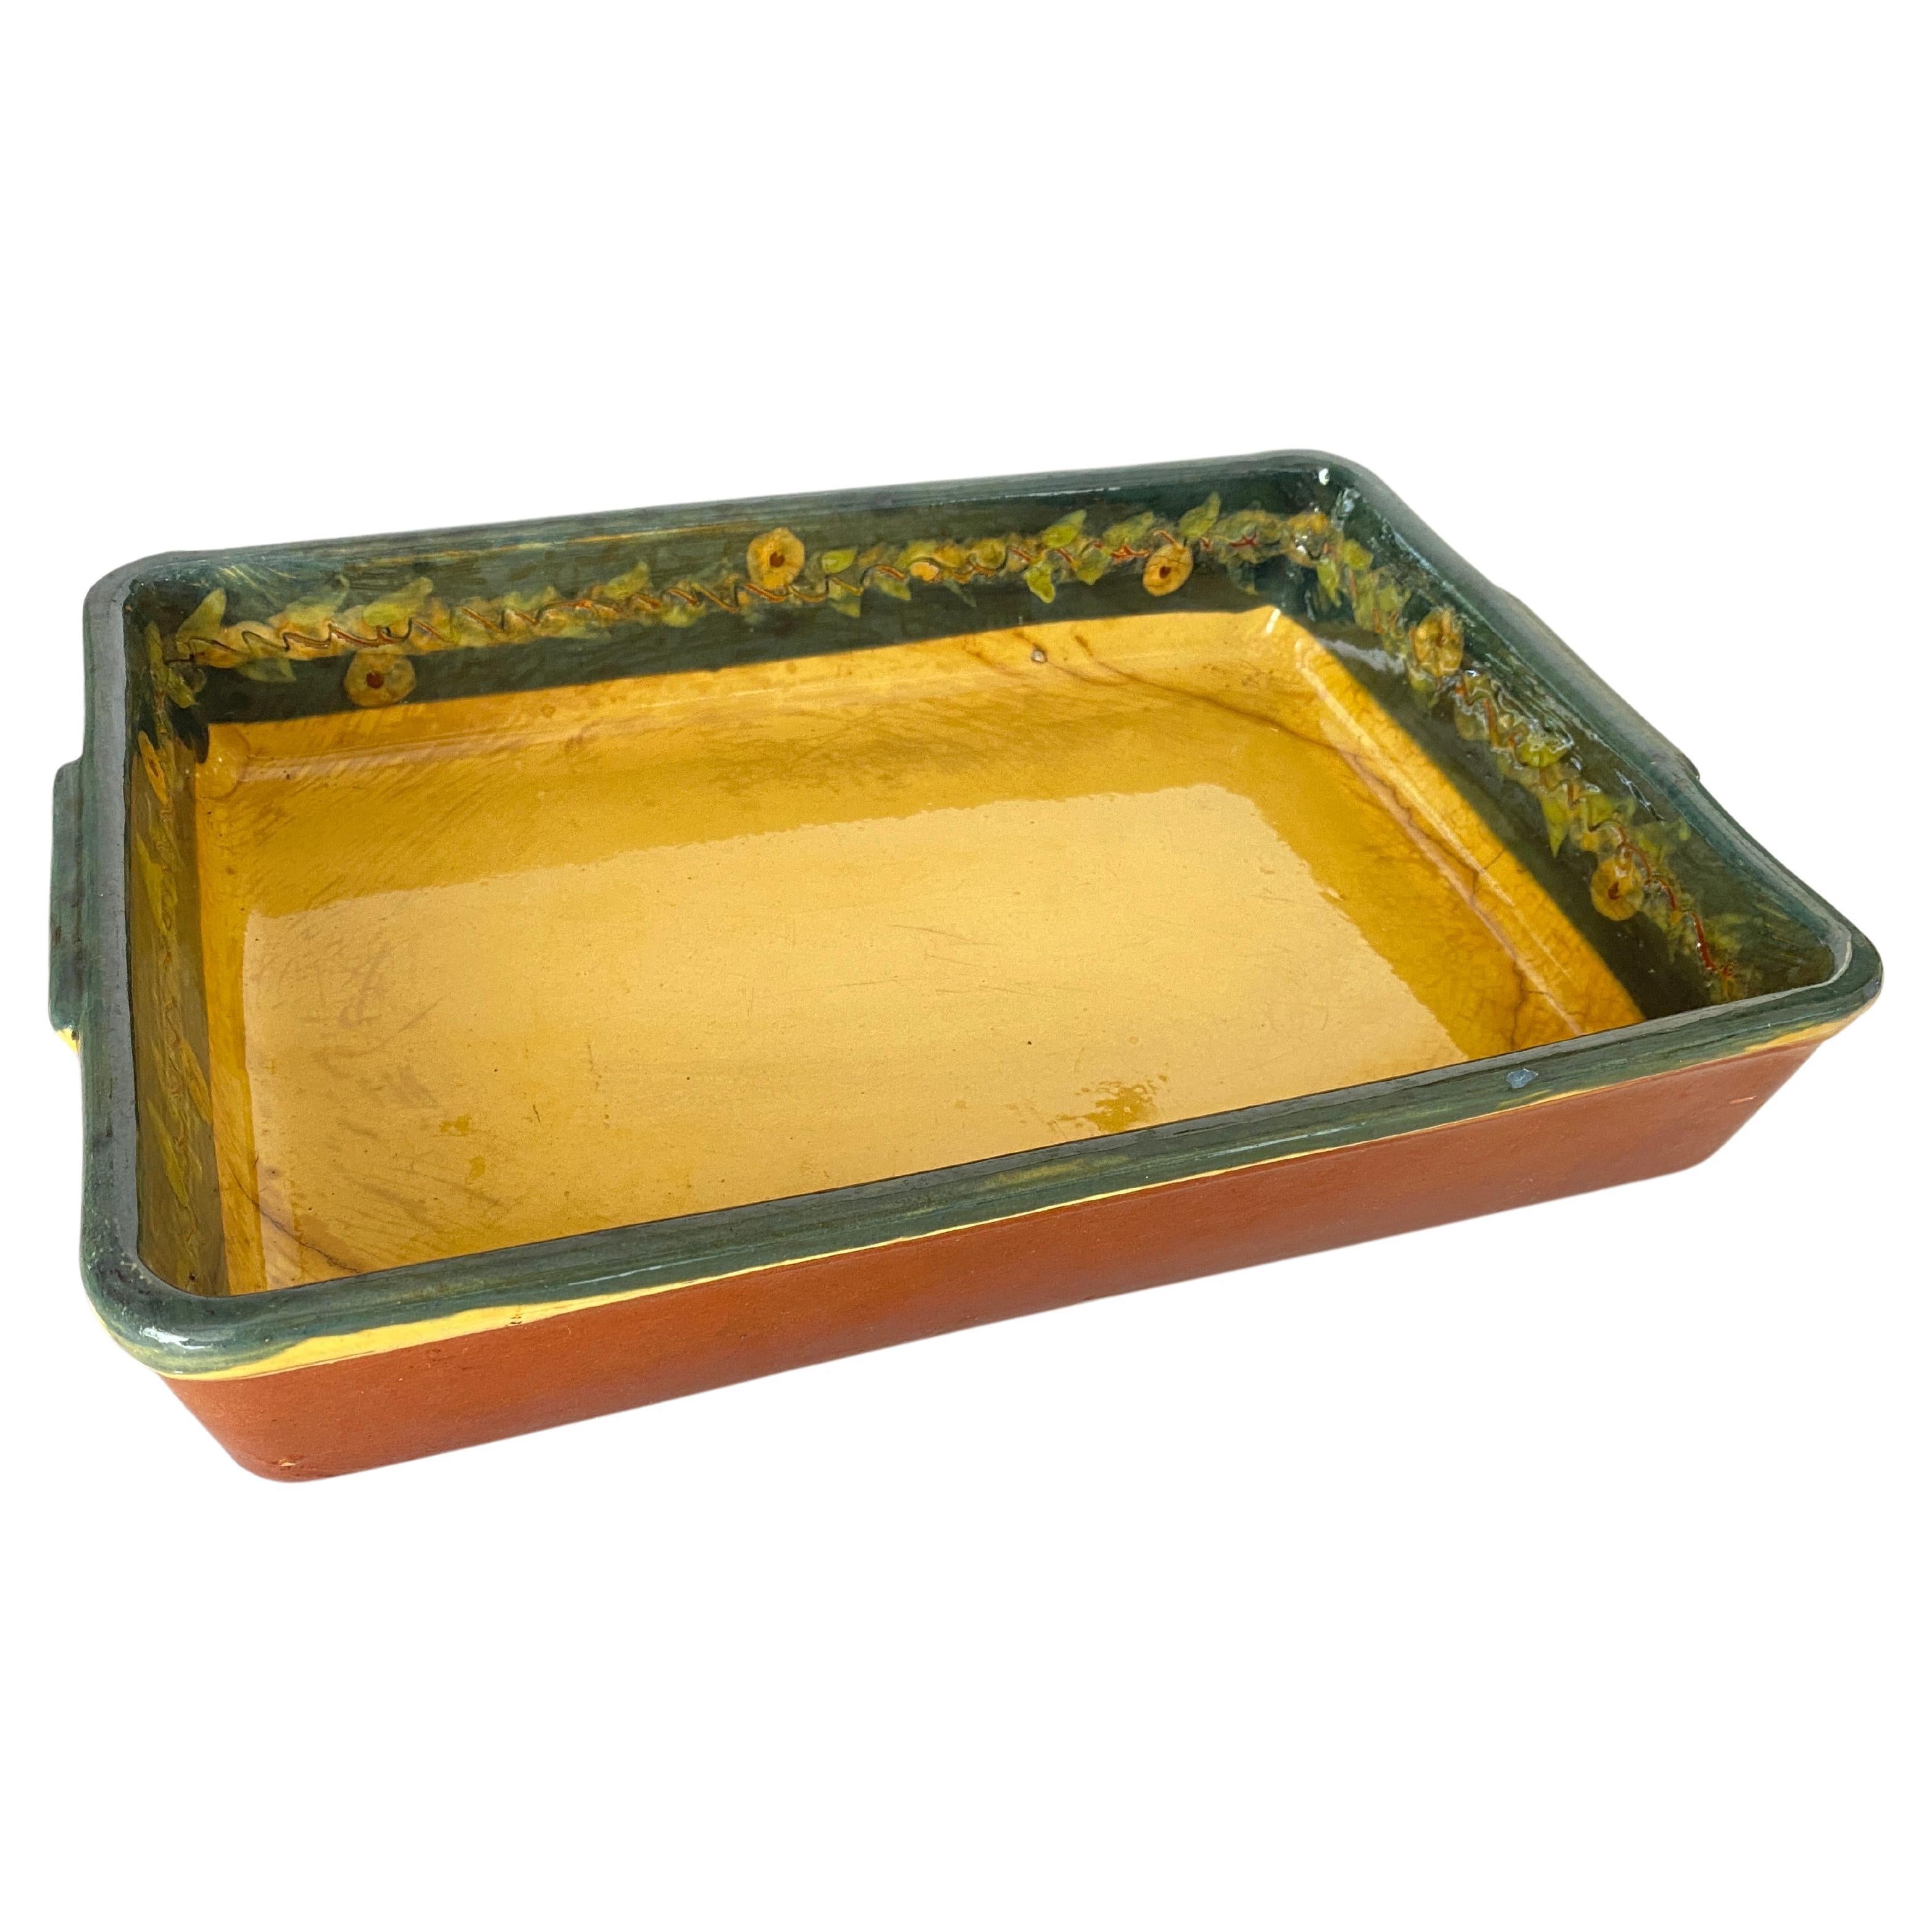 Earthenware oven dish Decorative Dish With flowers decoration Yellow Color  For Sale